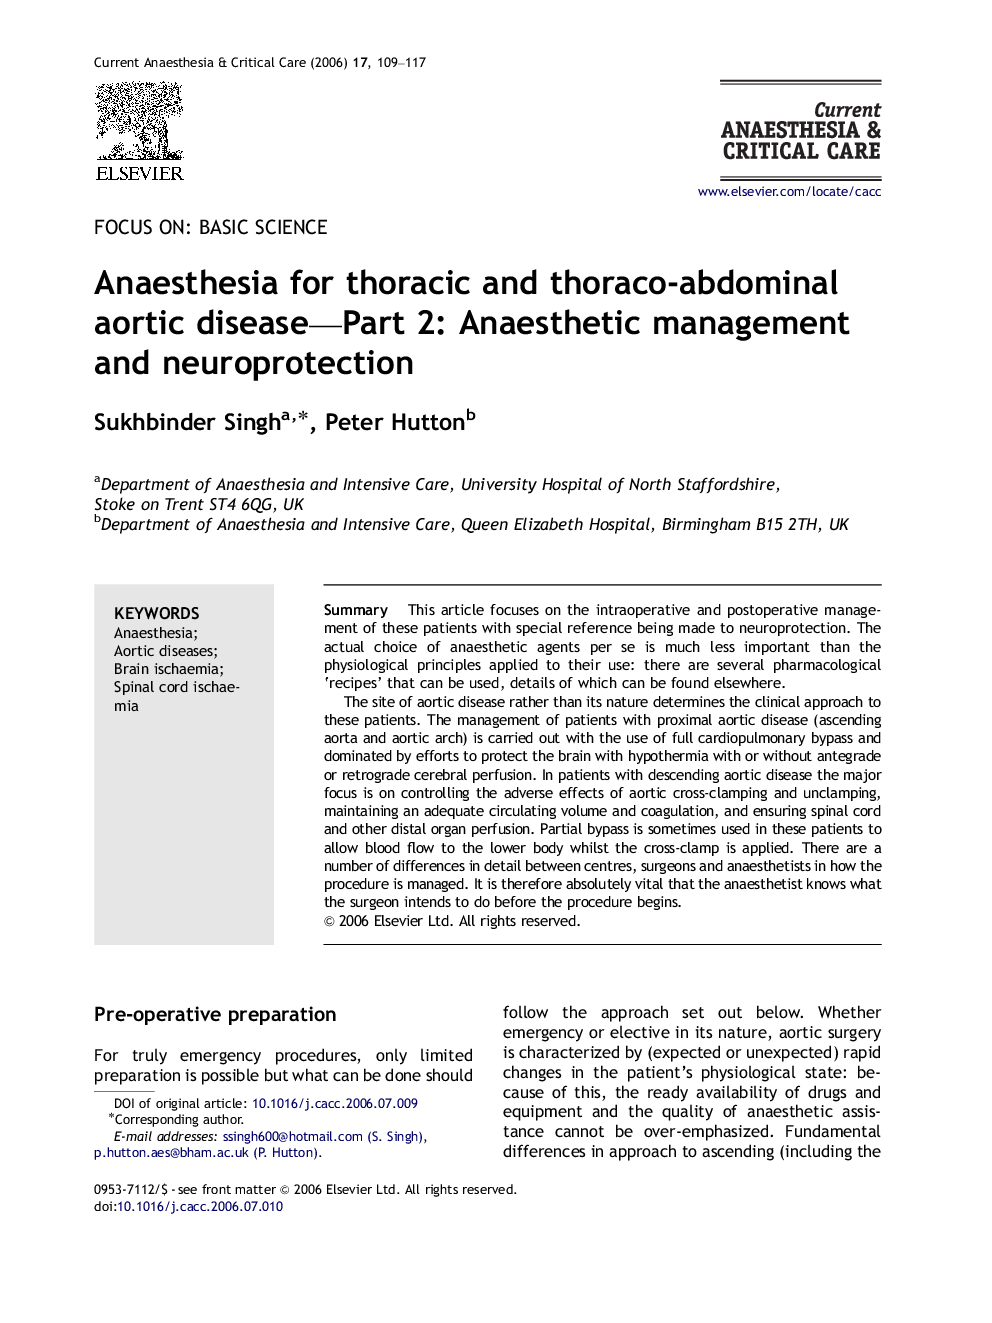 Anaesthesia for thoracic and thoraco-abdominal aortic disease-Part 2: Anaesthetic management and neuroprotection